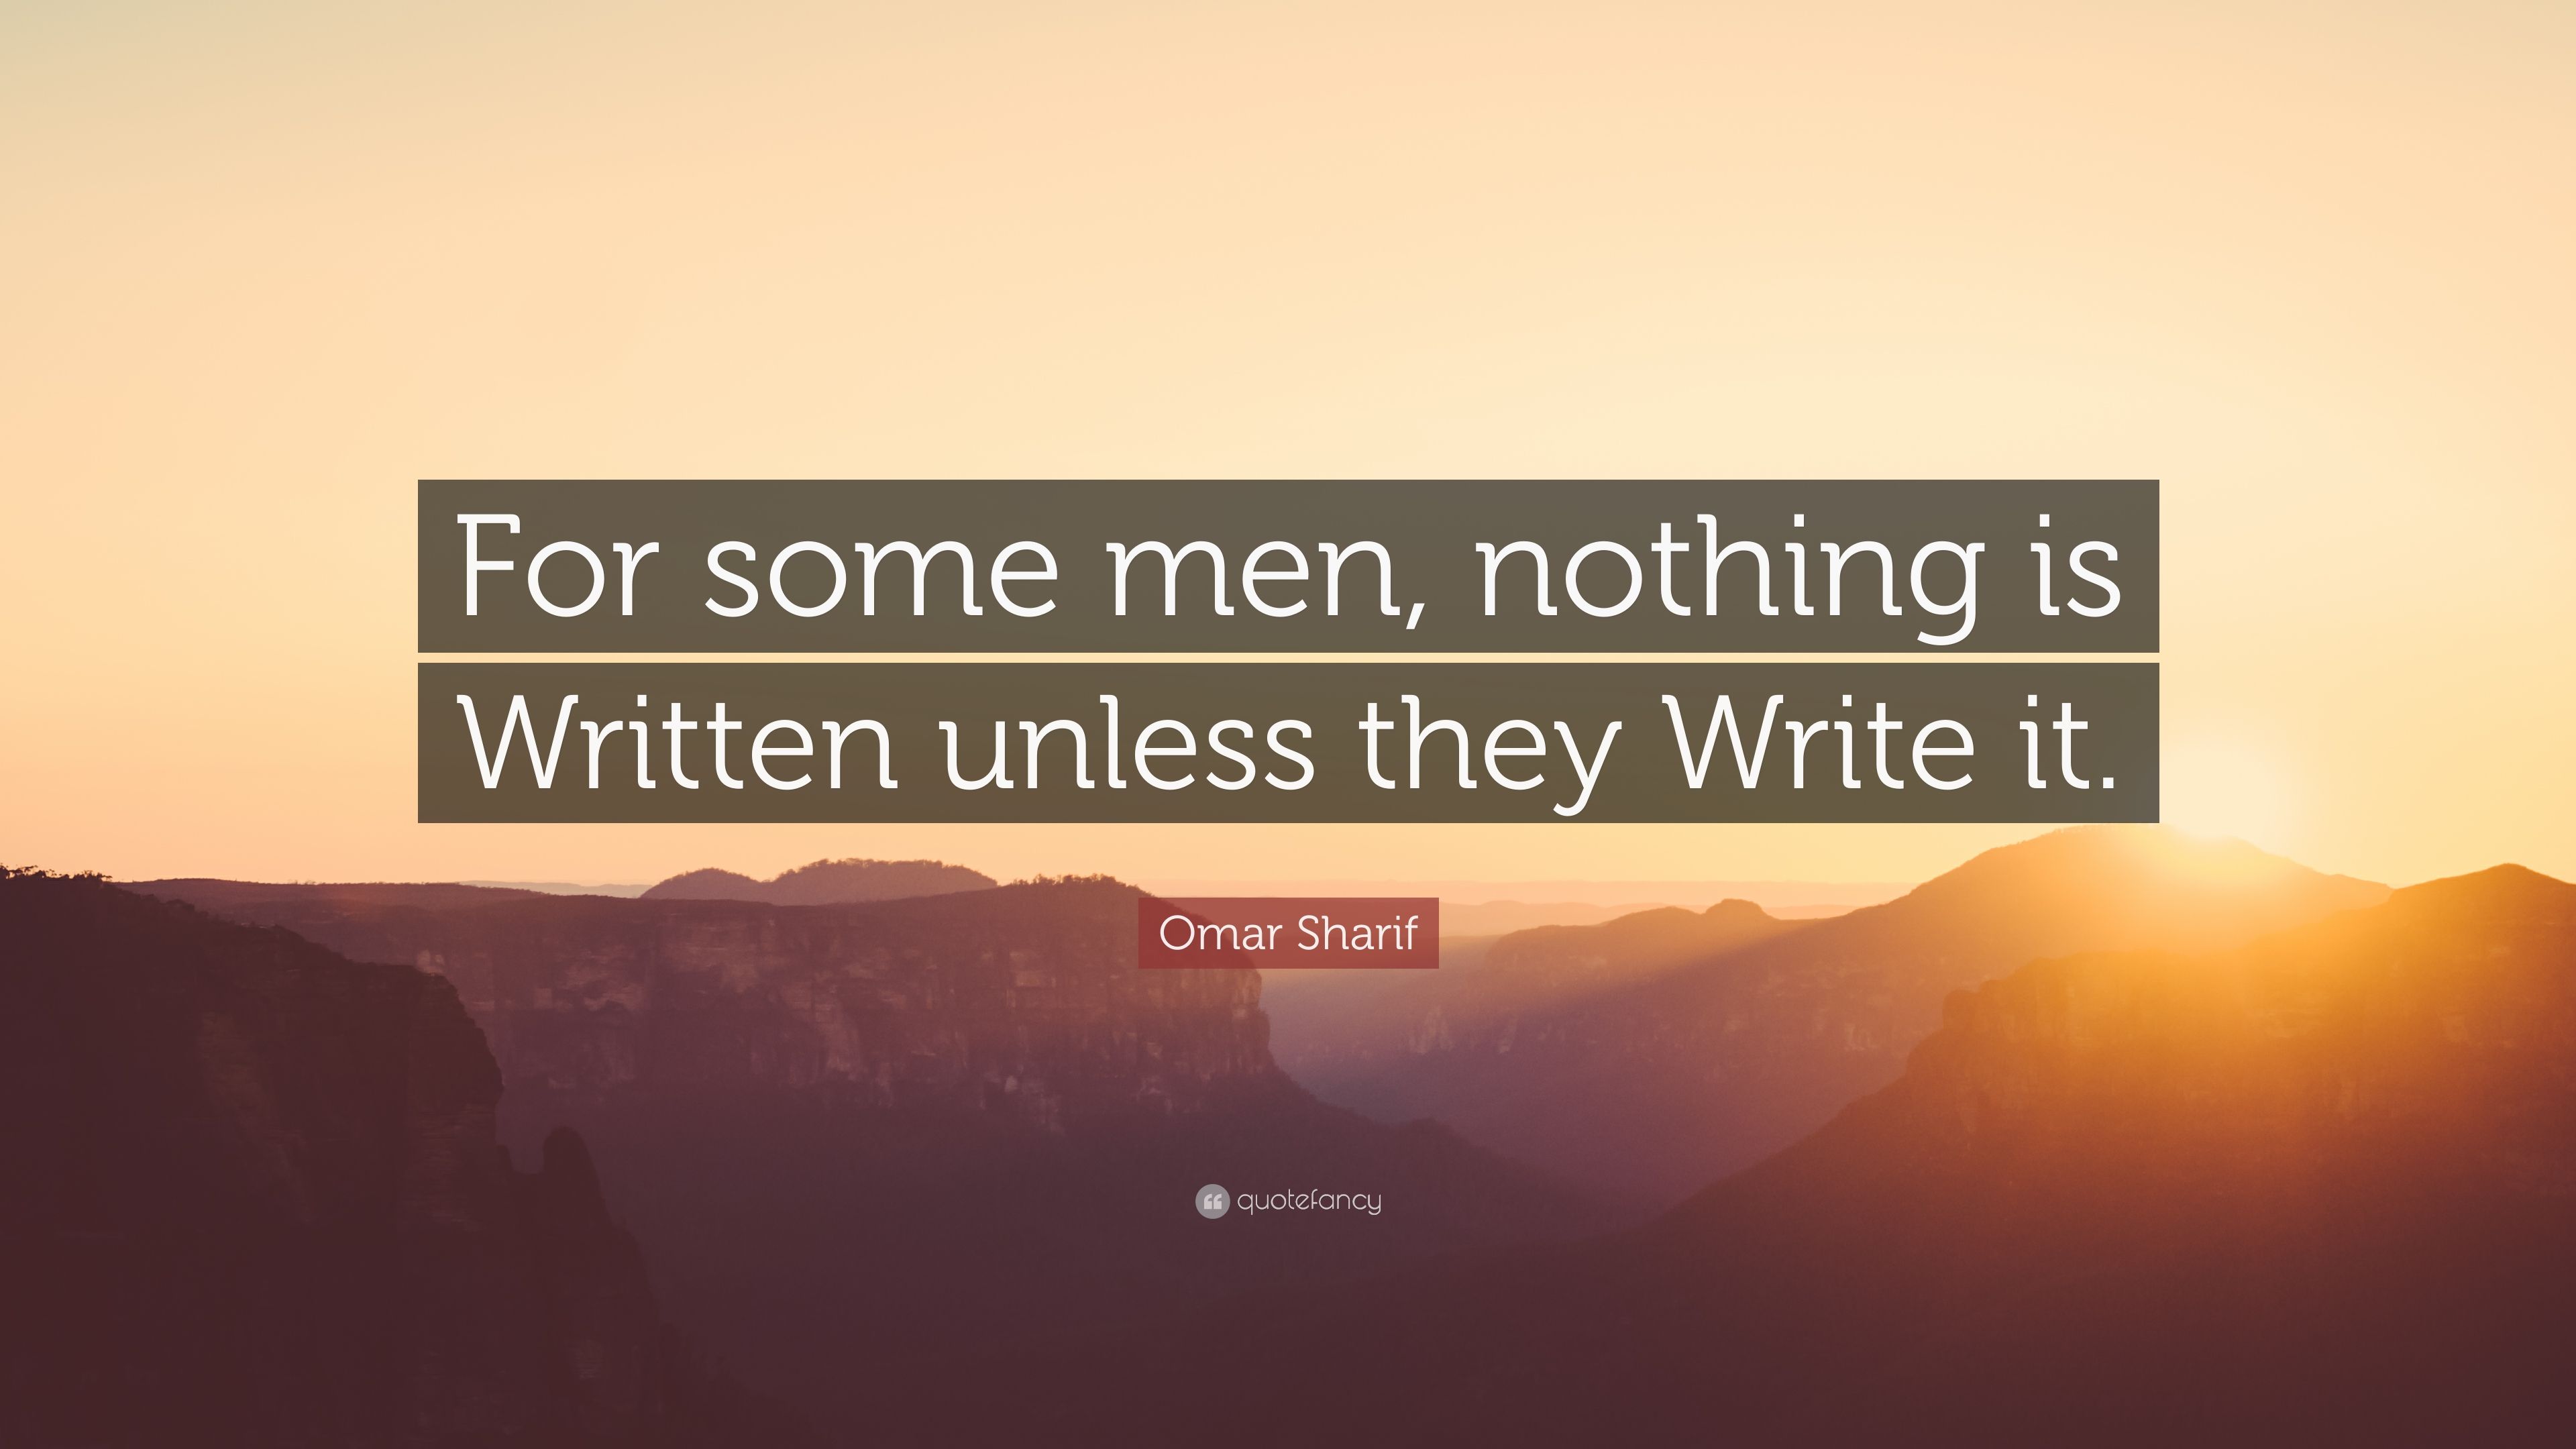 Omar Sharif Quote: “For some men, nothing is Written unless they Write it.” (7 wallpaper)